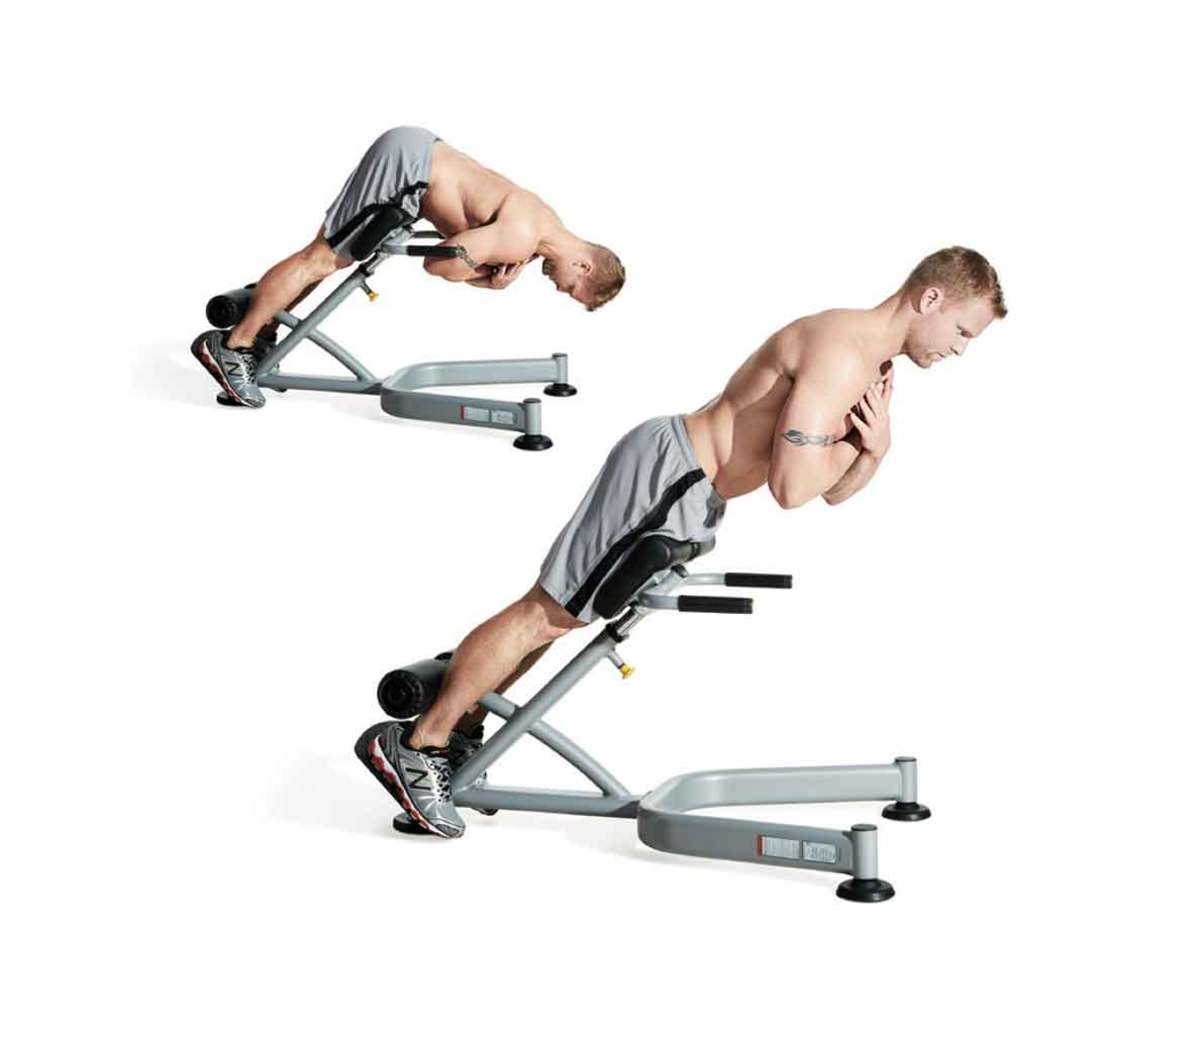 Exercise for lower lats & complete back workout, precisely notice